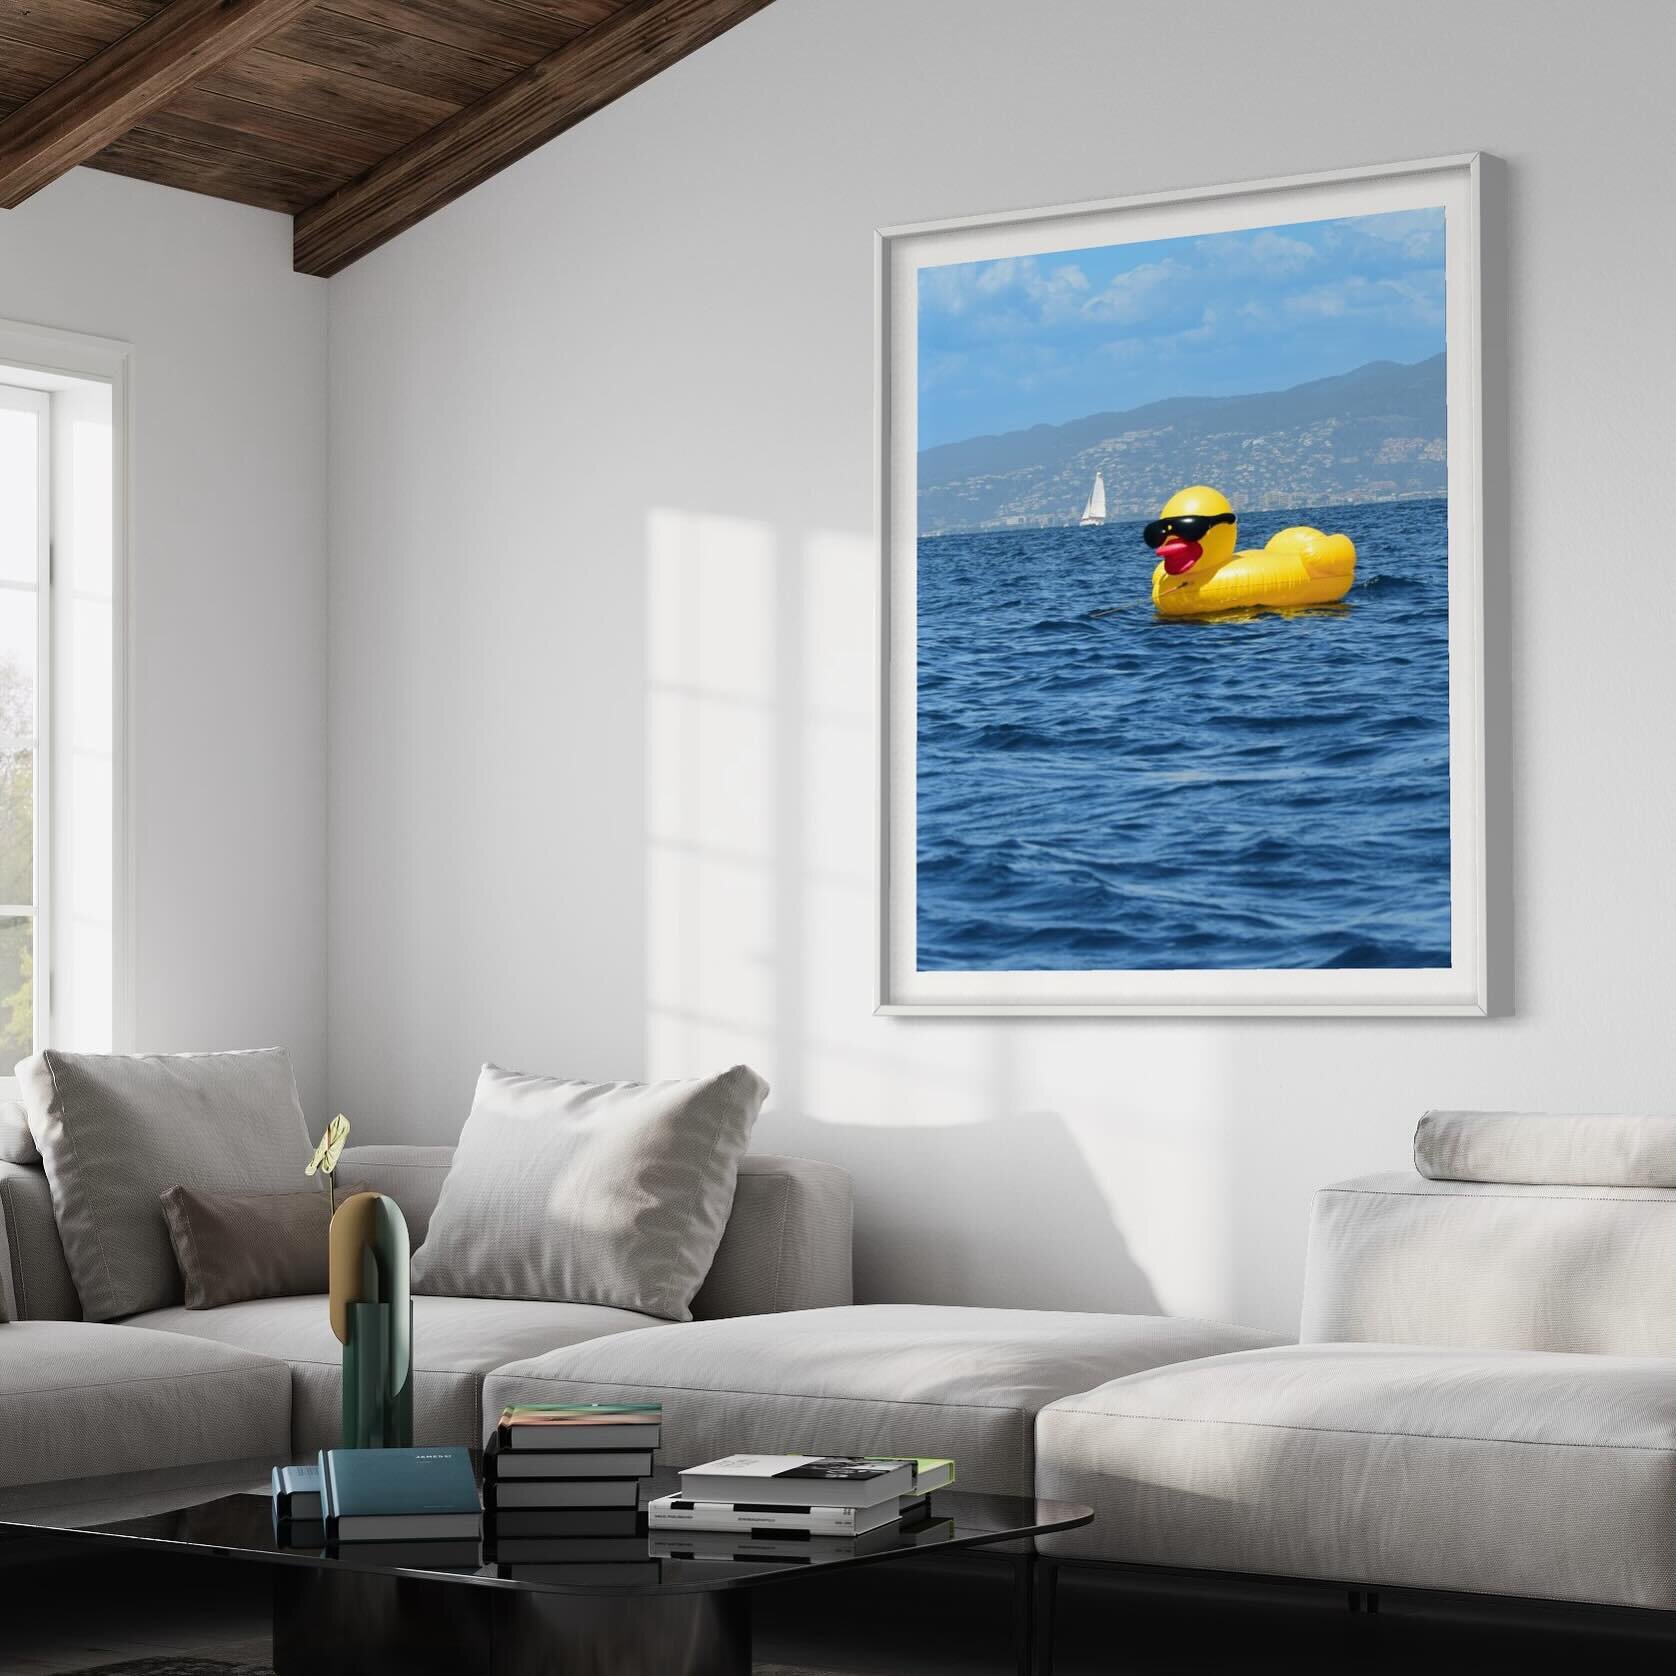 Eh up Duck!

Now available in all of the usual sizes. Head over to the website for more information - #linkinbio

#cannes #sun #sea #superyacht #duck #party #dj #summer #art #artist #photography #photo #antibes #juanlespins #cotedazur #beach #decor #